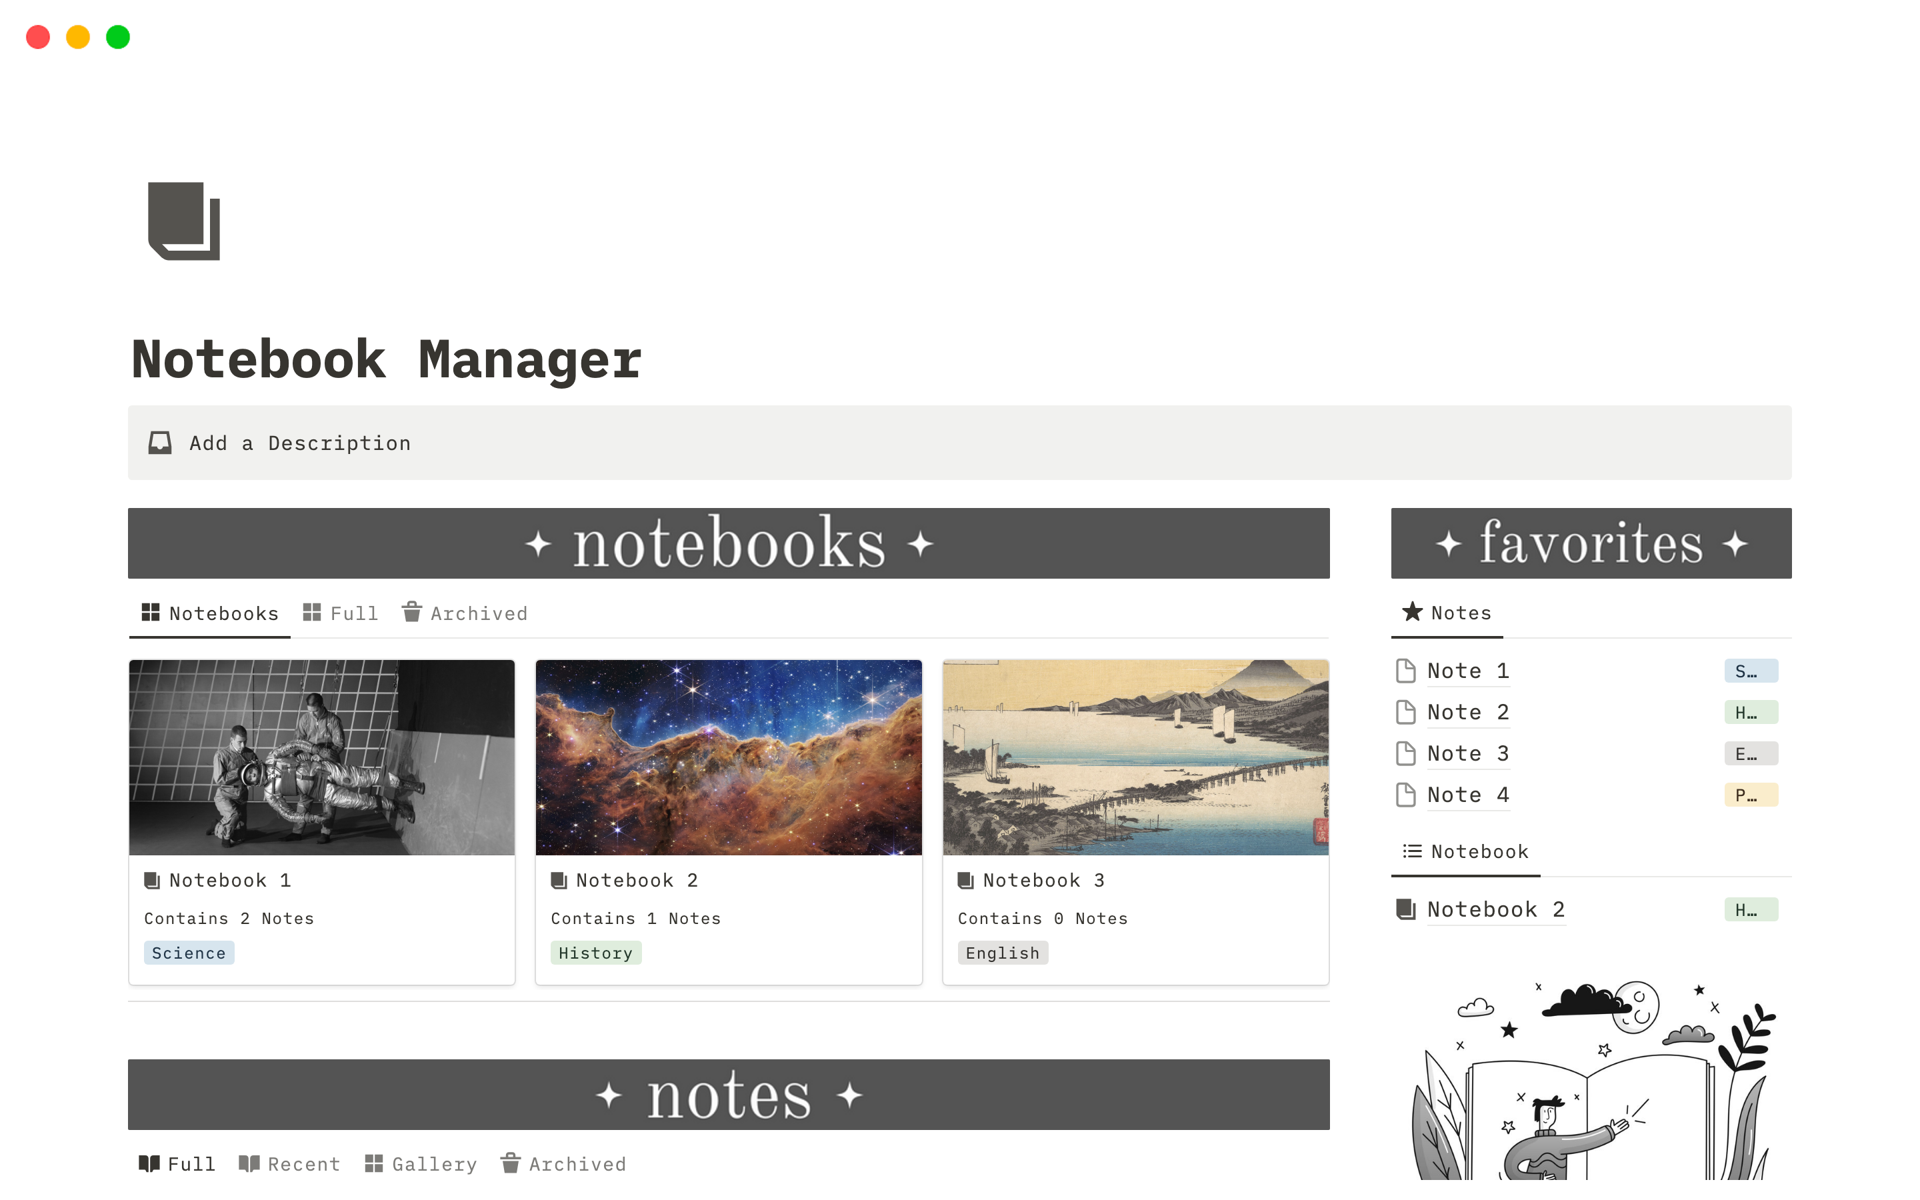 Notebook Manager provides you with an easy-to-use template for organizing and managing your Notes in Notion.